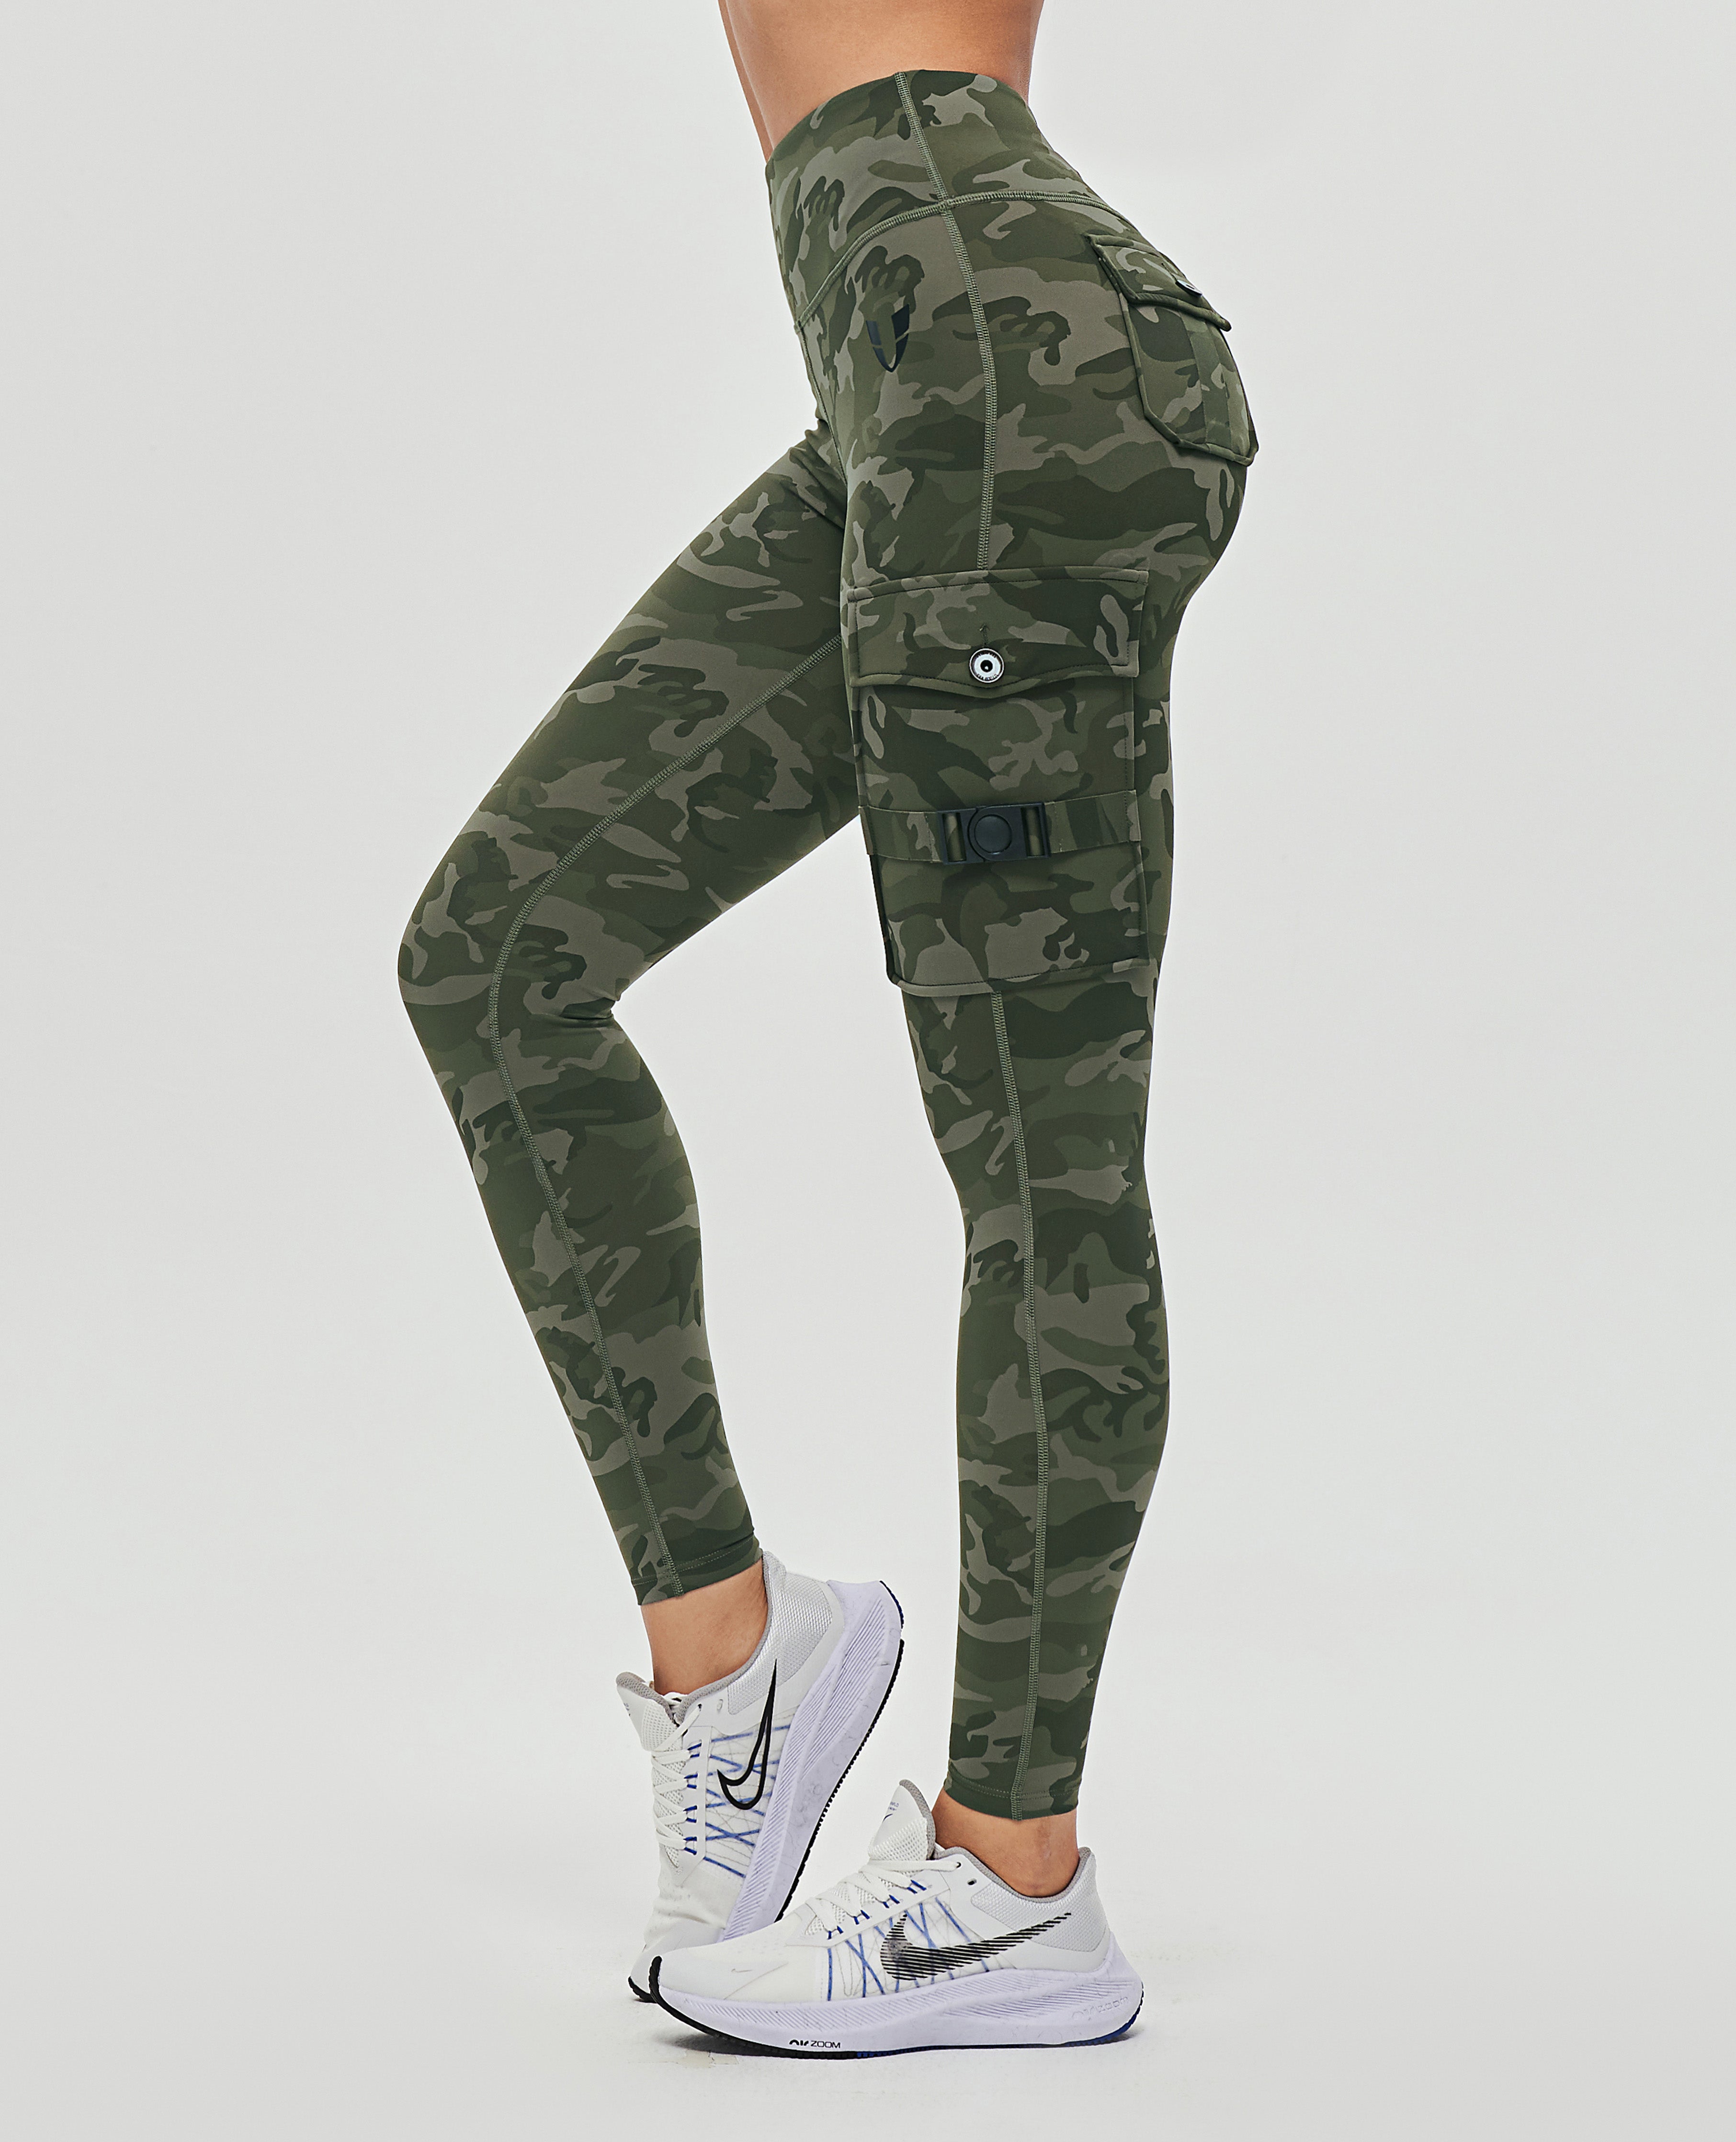 Deals of the Day!Taqqpue Womens High Waisted Leggings Women Green Lucky  Shamrock Clover Printed Tummy Control Tights St. Patrick's Day Print Tights  Workout Yoga Pants for Women on Clearance - Walmart.com